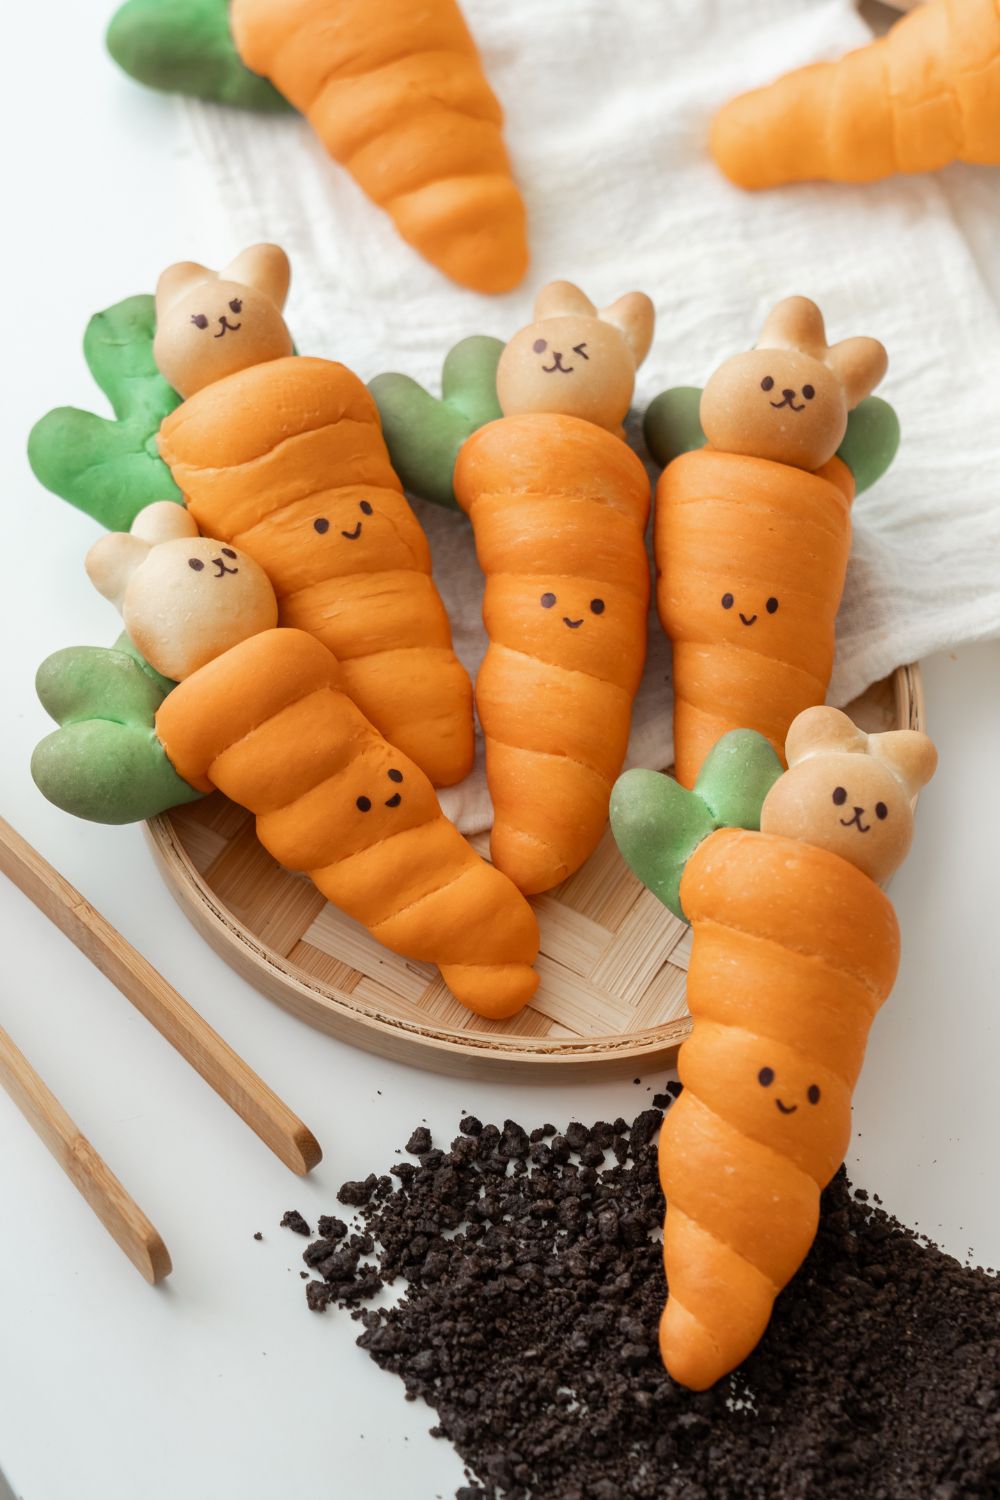 Bunny Bread with Cream Filling Baking Class for Kids 🥕🐇